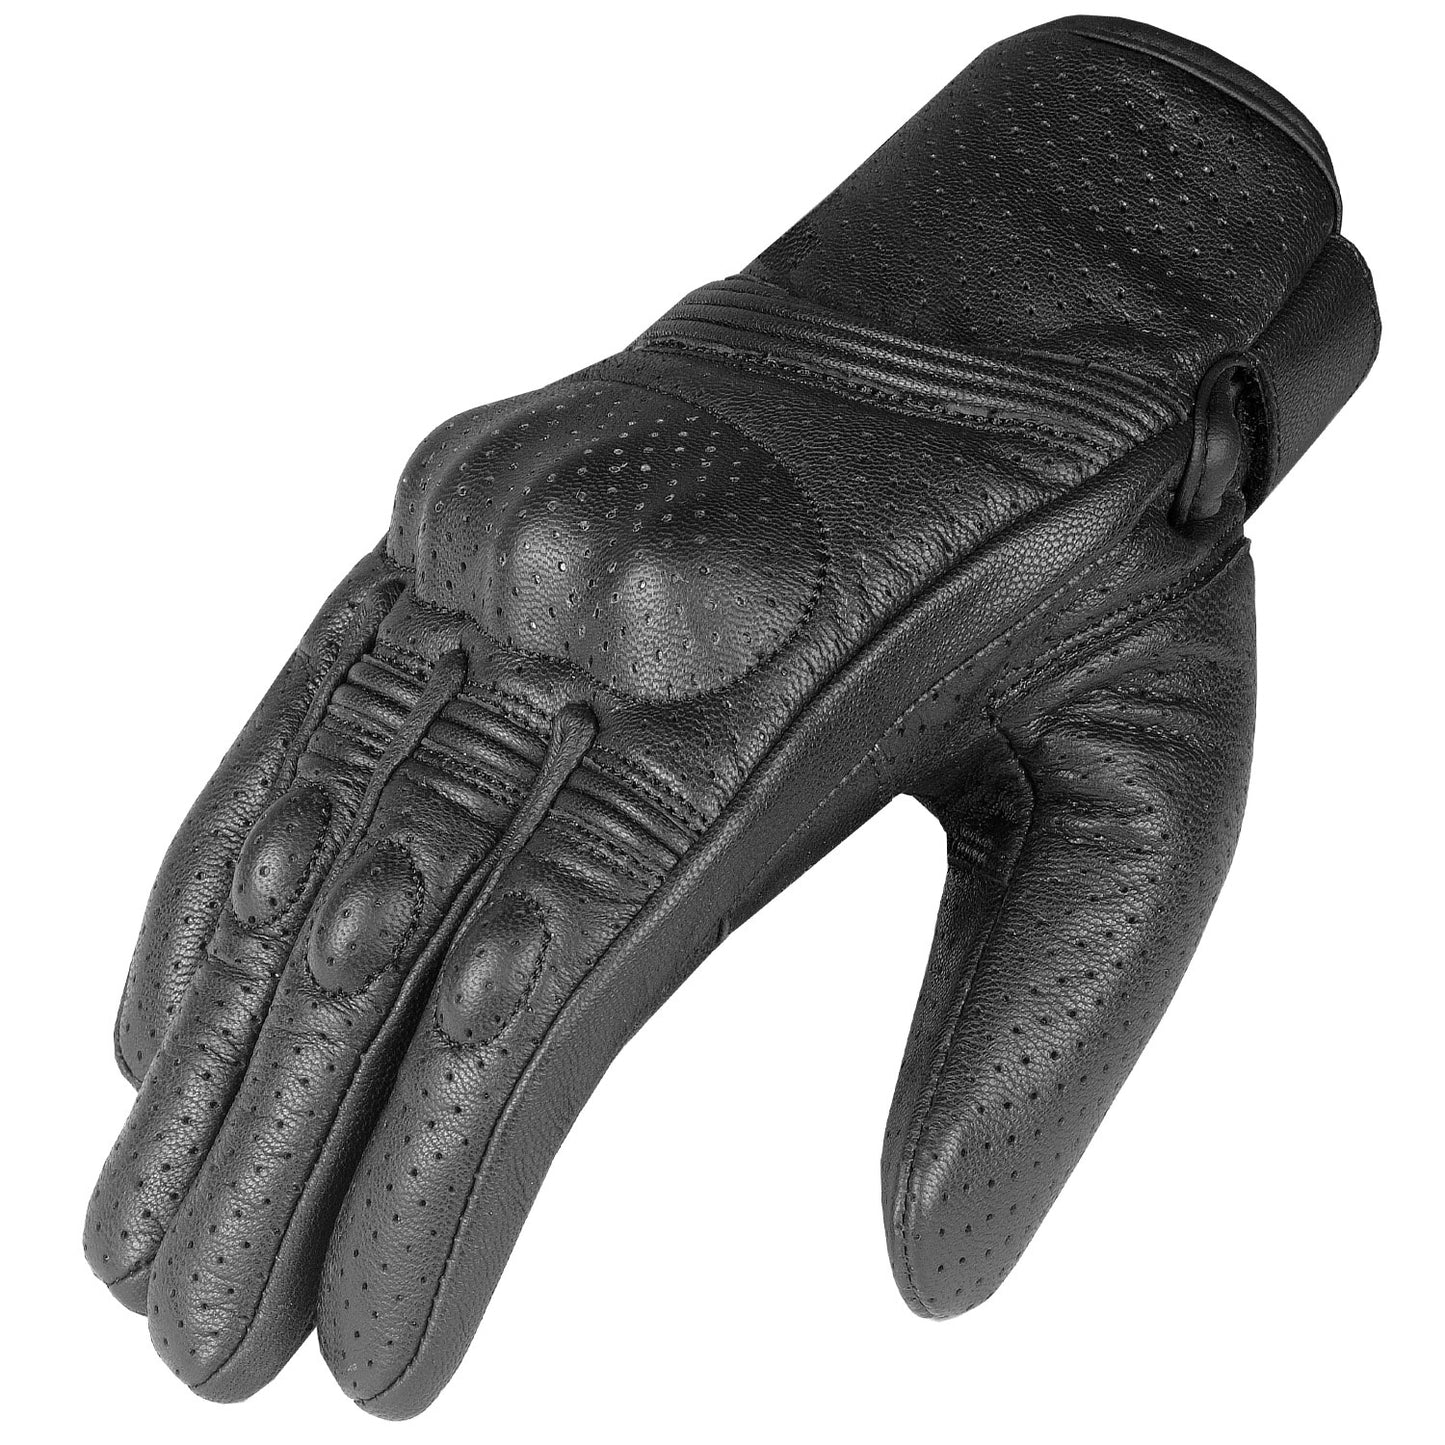 Men's Premium Leather Motorcycle Protective Perforated Gel Padded Gloves